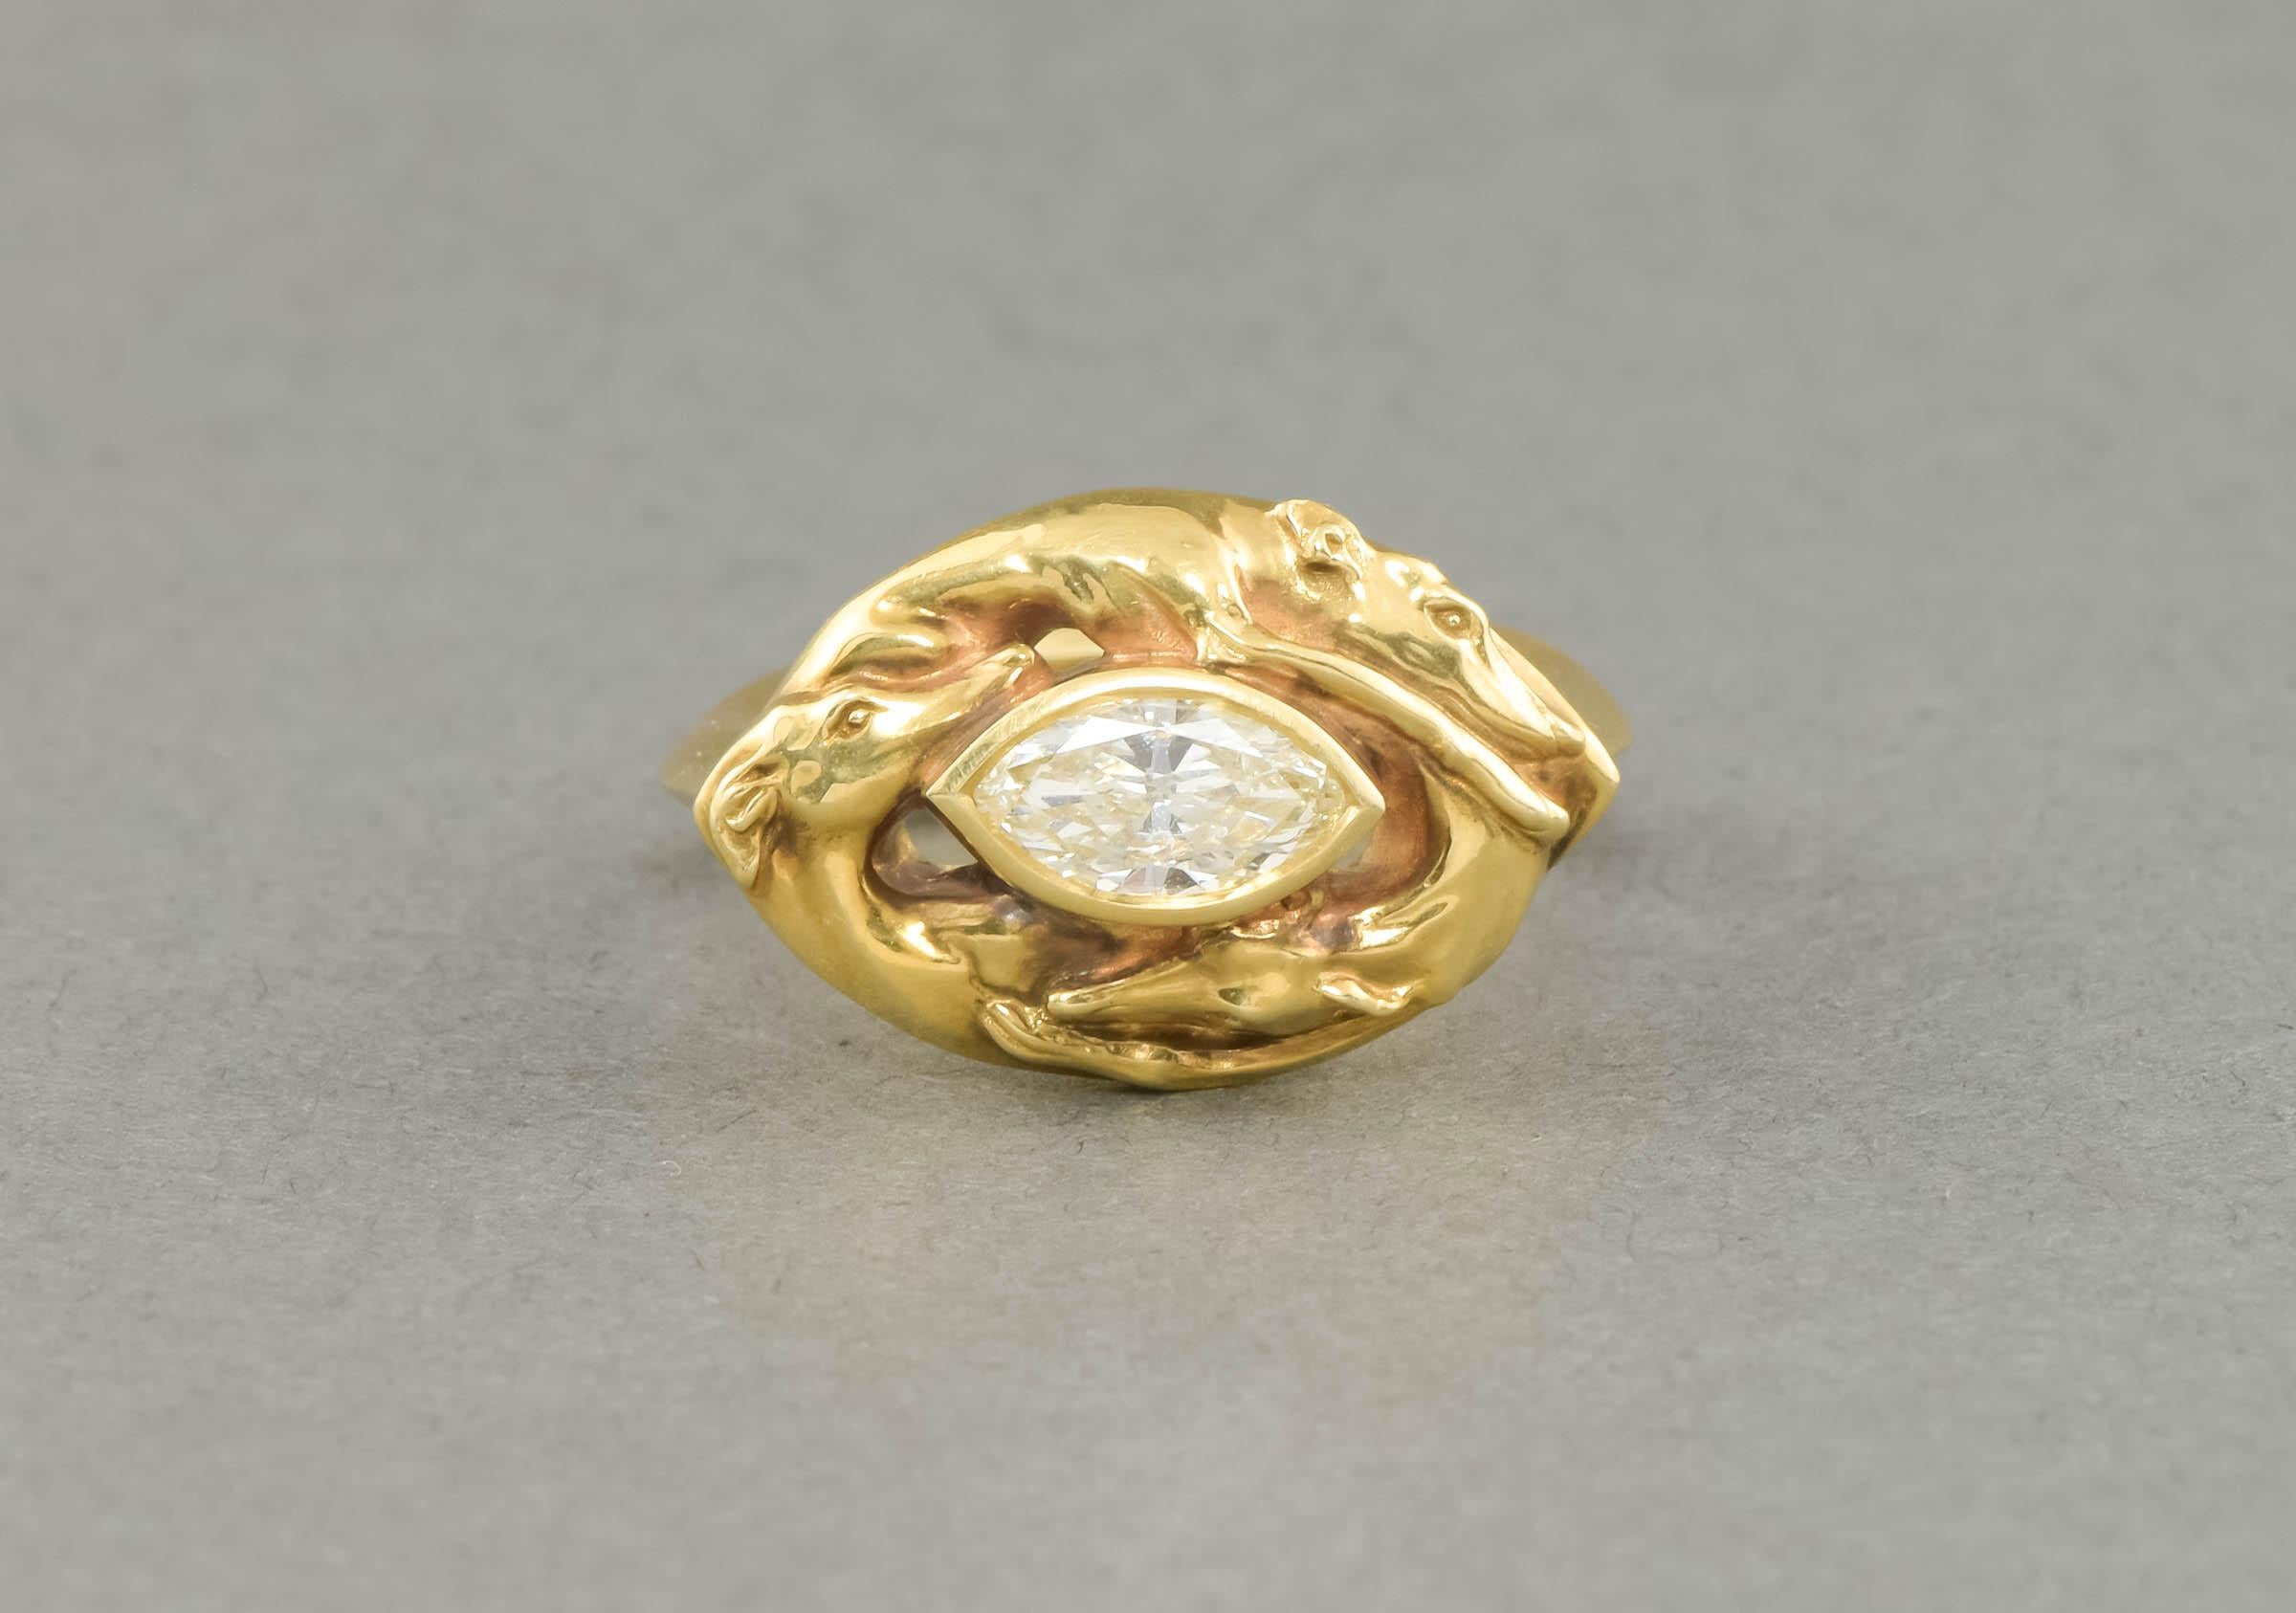 Inspired by an ancient ceramic Greek dogs-head chalice at the Getty museum, this marvelous ring was designed and hand carved by the talented jeweler Cheyenne Weil.  Weighty and substantial, the ring features a GIA certified marquise shaped brilliant